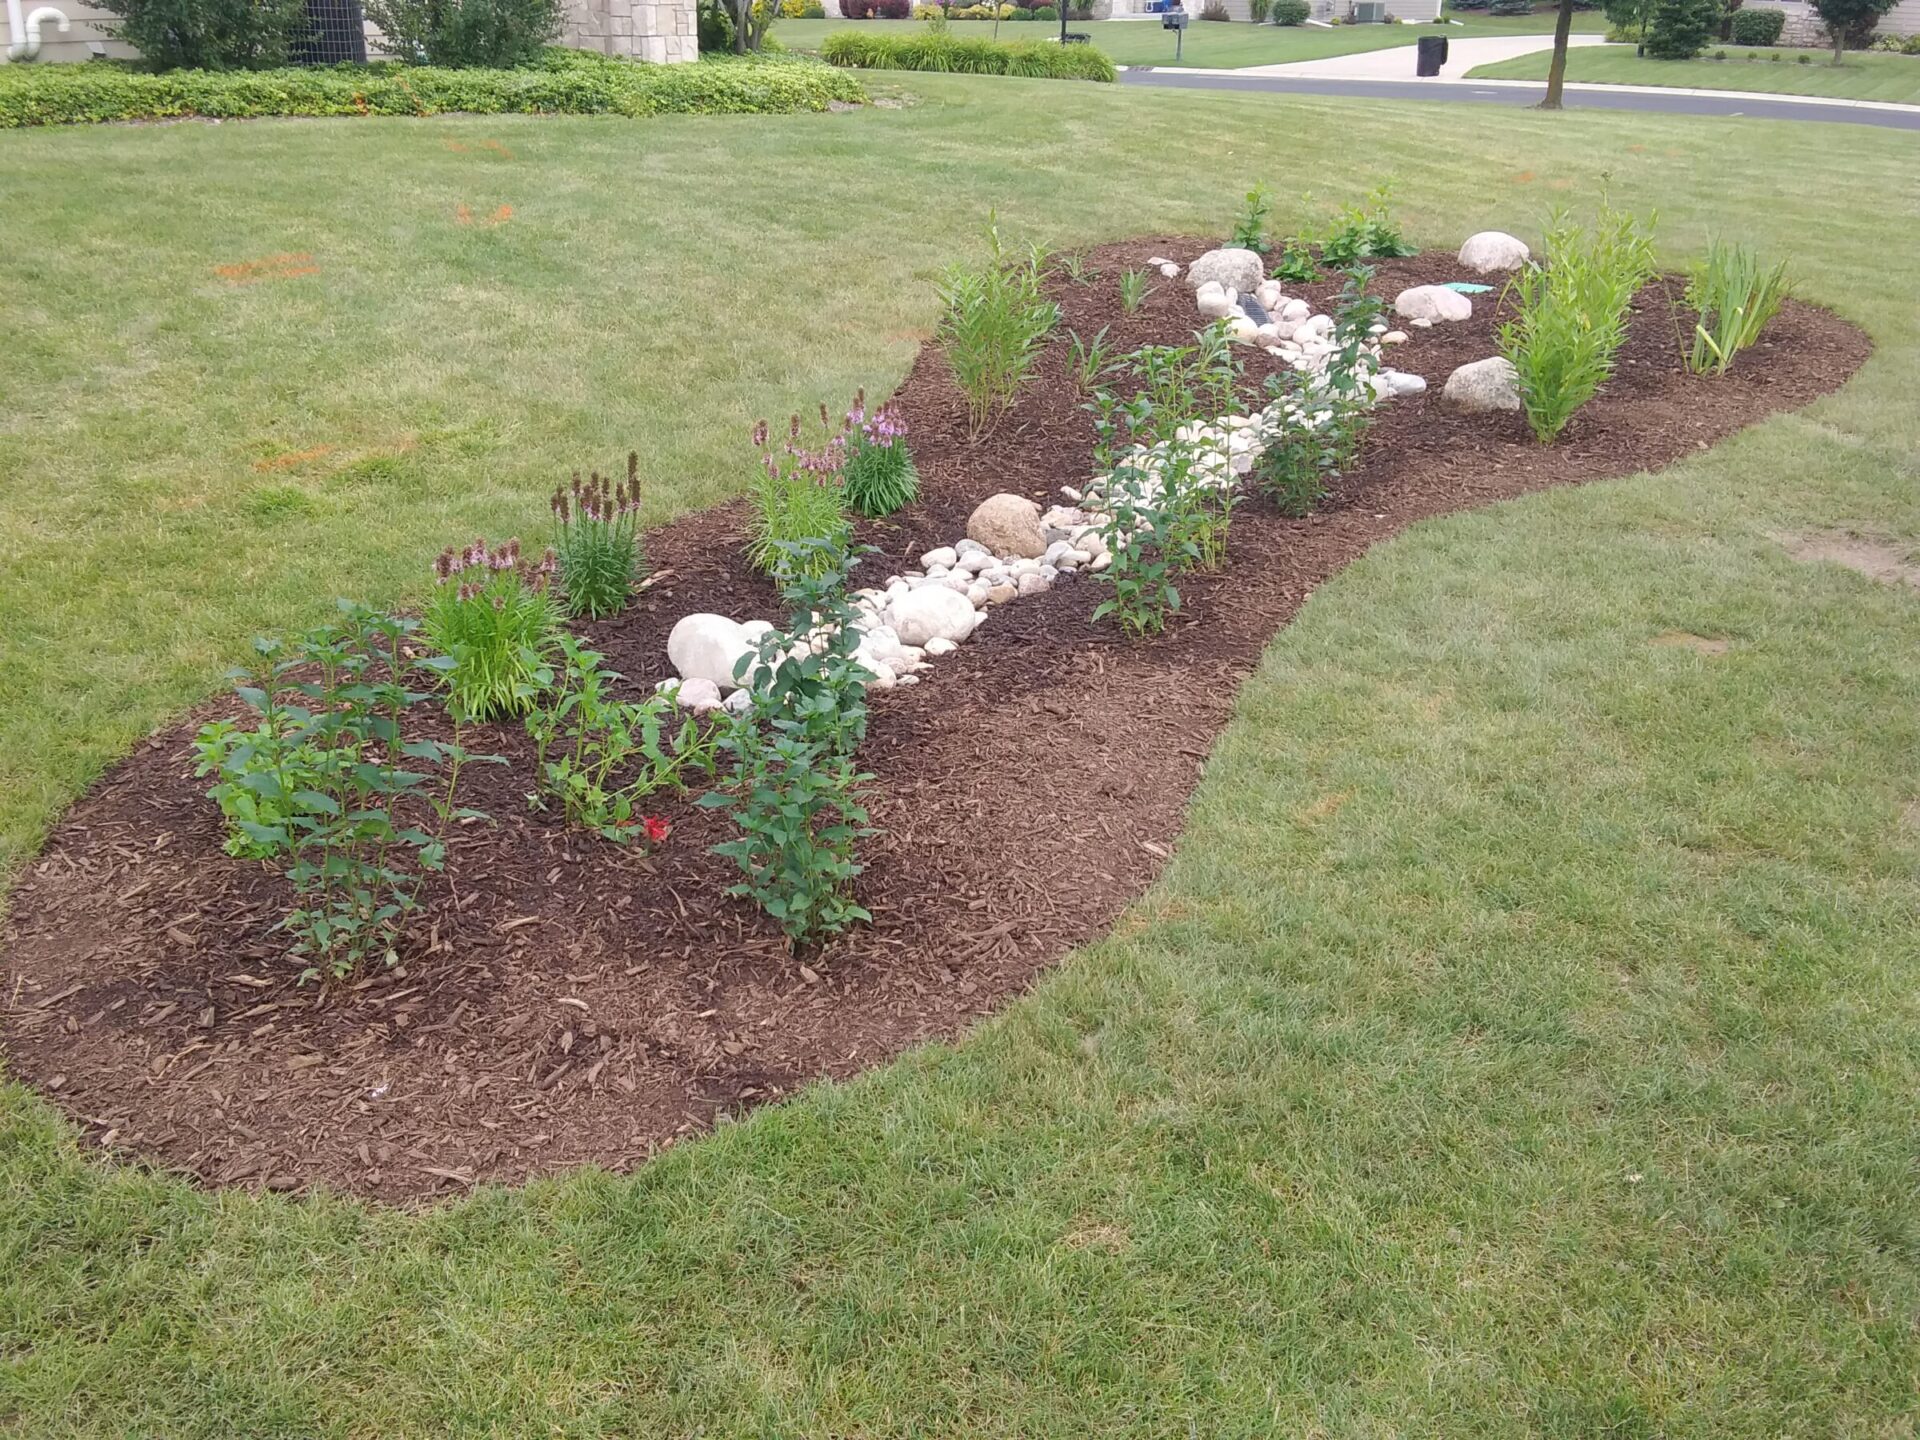 A landscaped garden bed with mulch, various plants, and arranged rocks creates a serpentine design against a backdrop of a neatly trimmed lawn.